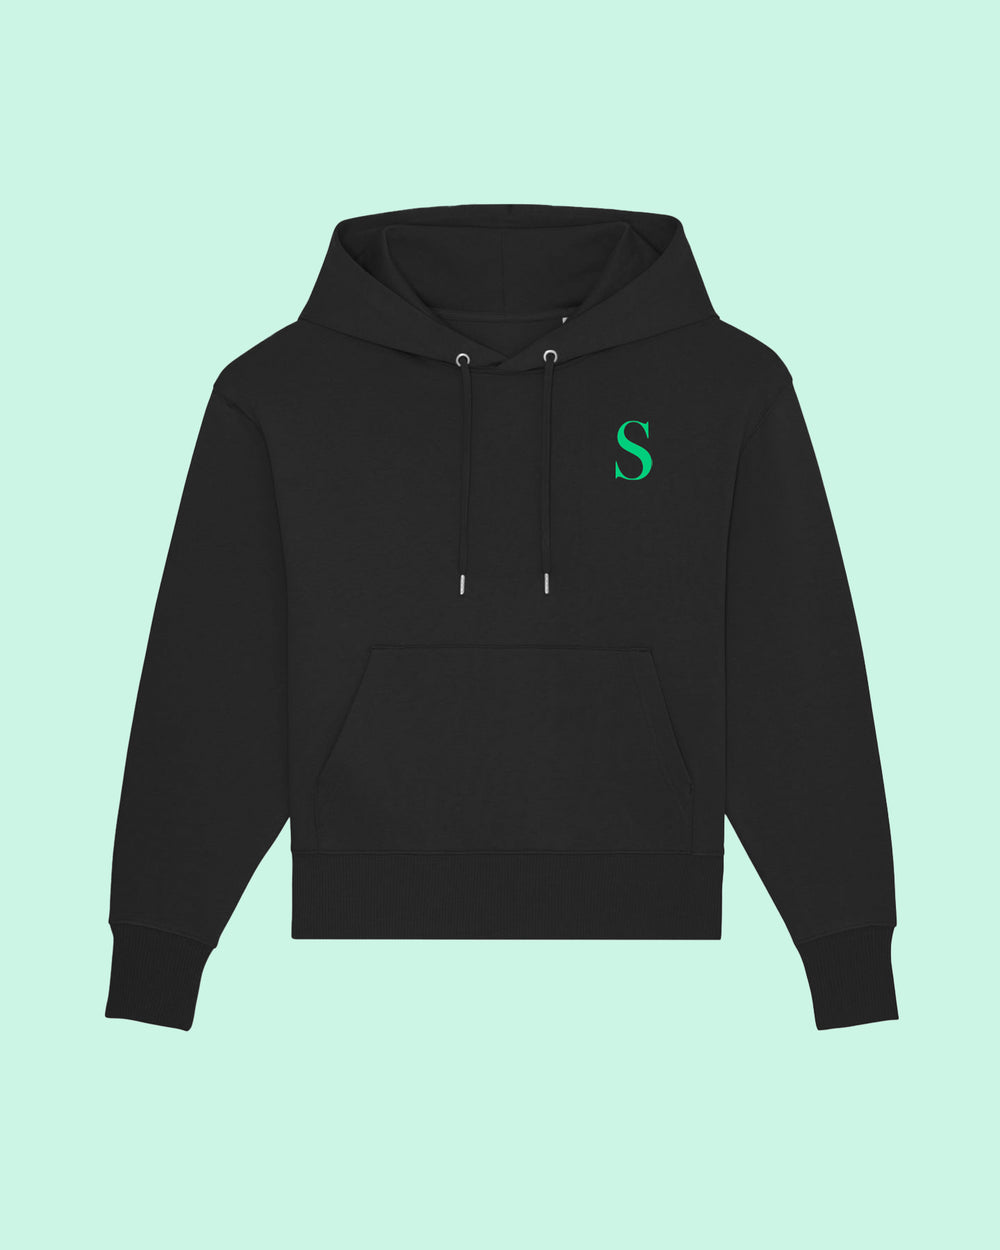 JOINTS Unisex Hooded Sweat/Hoodie by SAINFORT